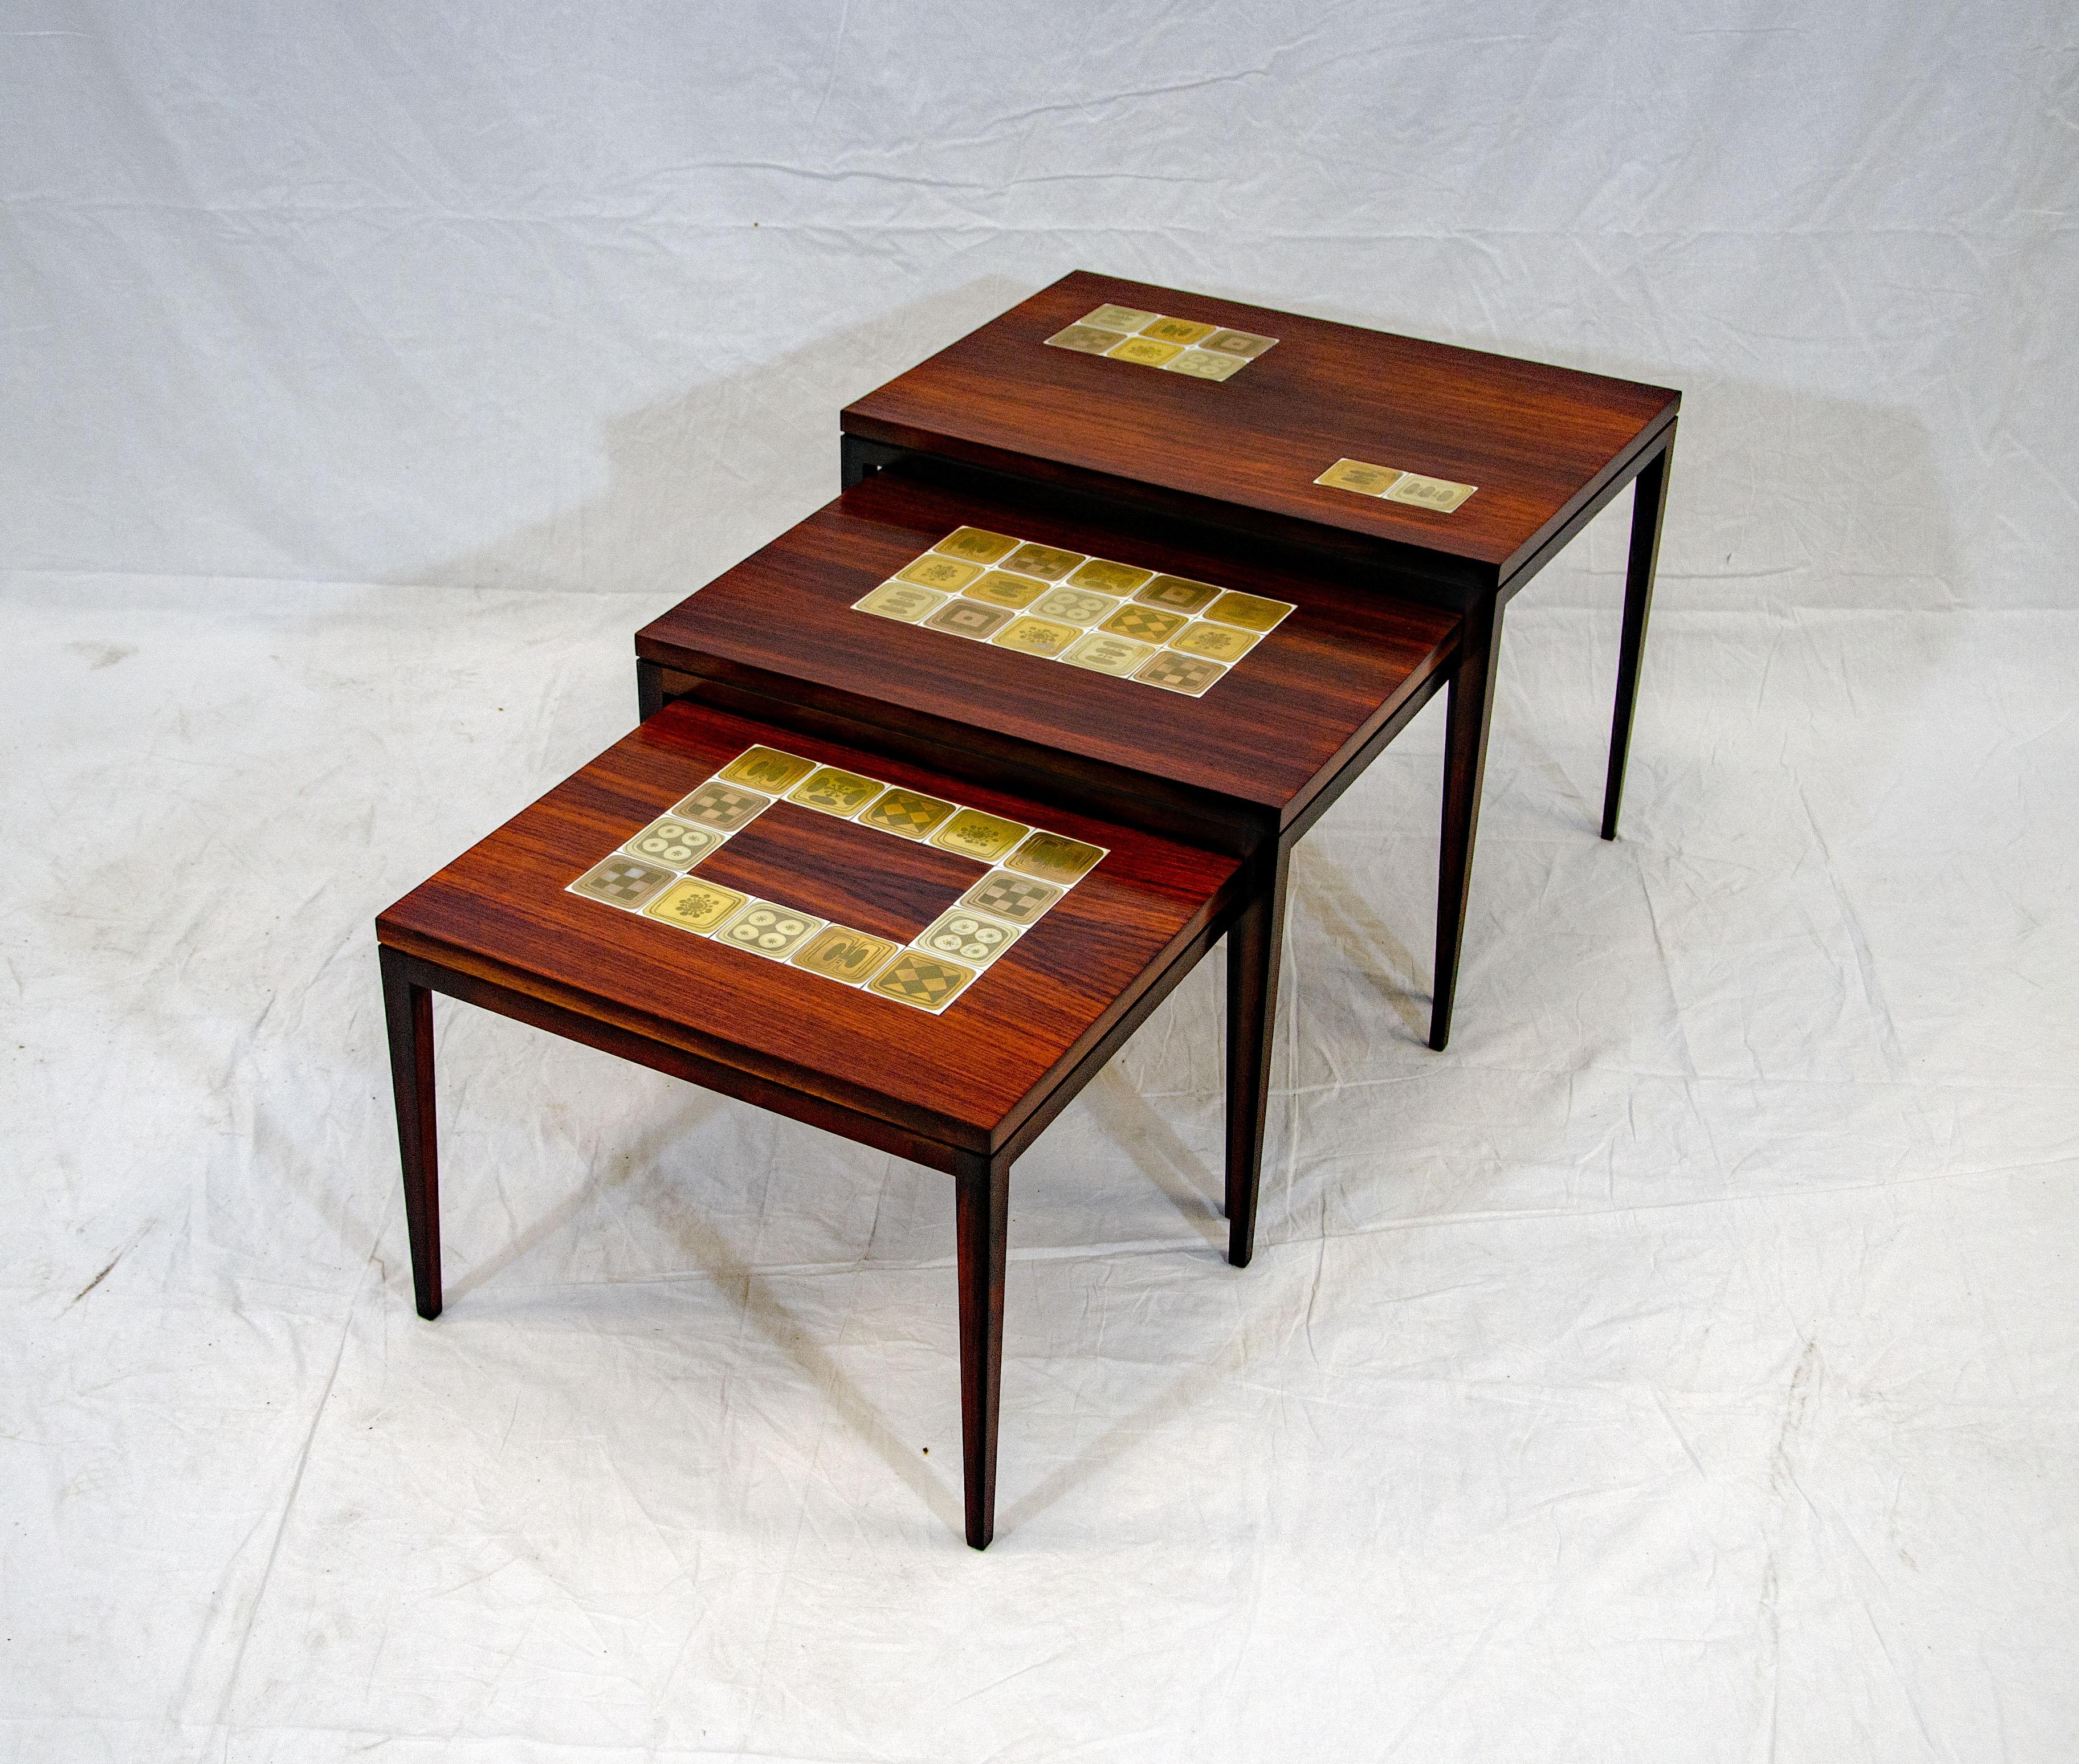 Nest of three rosewood veneer side tables on receding heights each with different arrangements of decorated patterns in gilt porcelain tiles inlays with geometric patterns. The tiles are decorated with abstracted plant motifs in different tones of